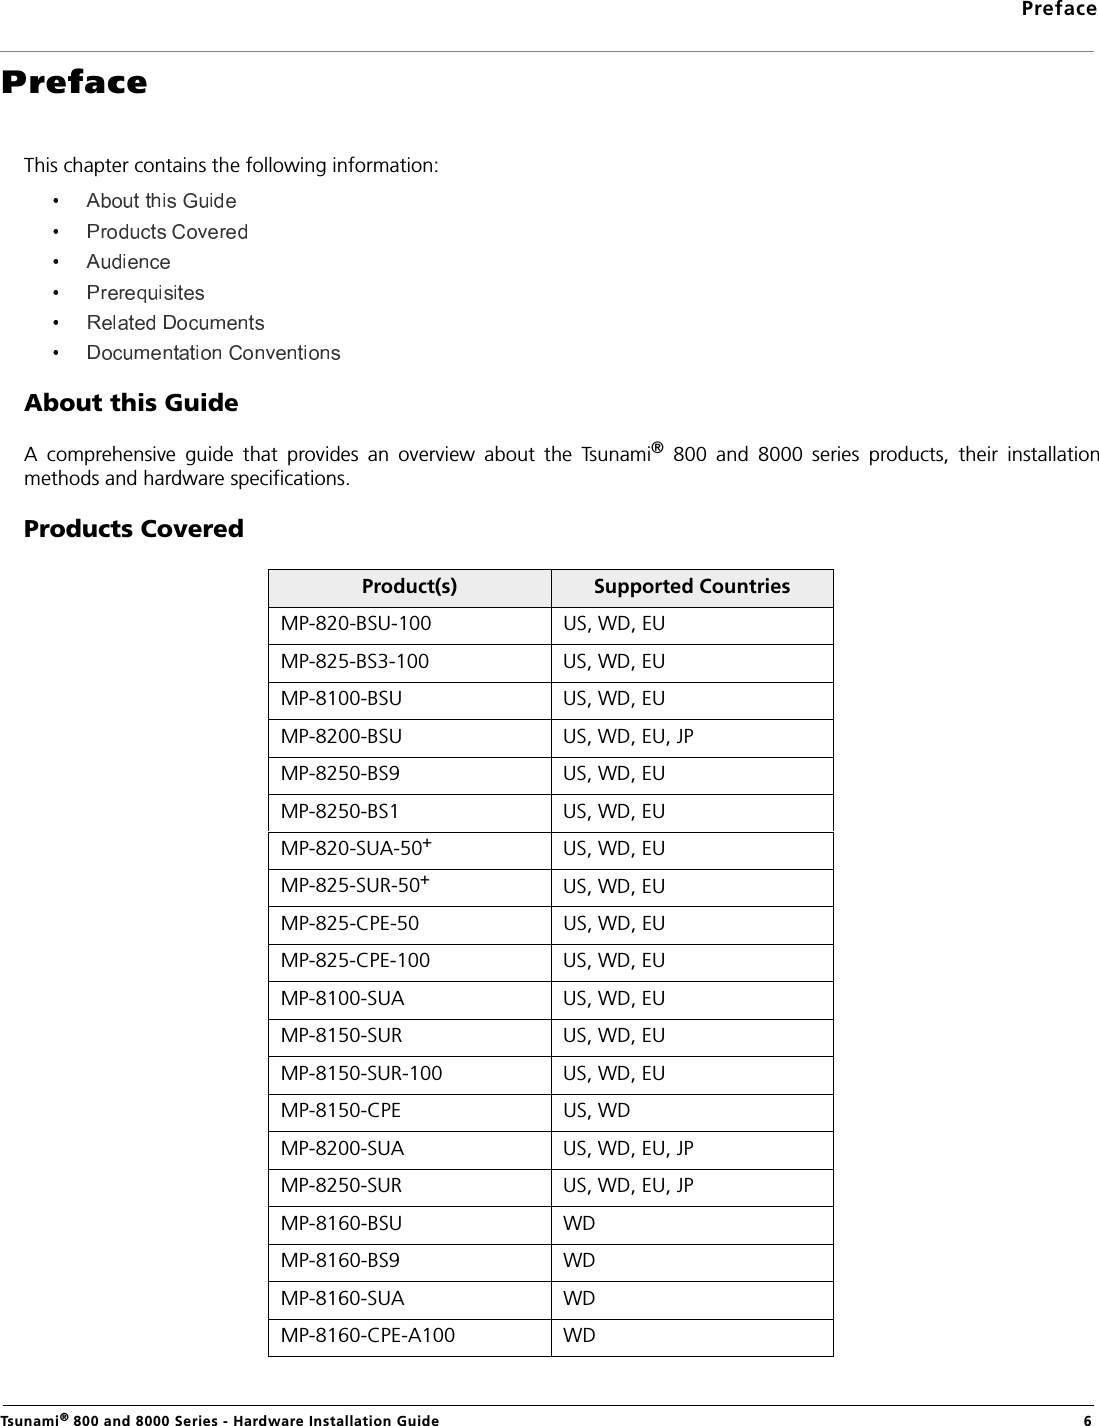 PrefaceTsunami® 800 and 8000 Series - Hardware Installation Guide  6PrefaceThis chapter contains the following information:About this GuideA  comprehensive  guide  that  provides  an  overview  about  the  Tsunami®  800  and  8000  series  products,  their  installationmethods and hardware specifications.Products CoveredProduct(s) Supported CountriesMP-820-BSU-100 US, WD, EUMP-825-BS3-100 US, WD, EUMP-8100-BSU  US, WD, EUMP-8200-BSU  US, WD, EU, JPMP-8250-BS9 US, WD, EUMP-8250-BS1 US, WD, EUMP-820-SUA-50+US, WD, EUMP-825-SUR-50+US, WD, EUMP-825-CPE-50 US, WD, EUMP-825-CPE-100 US, WD, EUMP-8100-SUA  US, WD, EUMP-8150-SUR US, WD, EUMP-8150-SUR-100 US, WD, EUMP-8150-CPE US, WDMP-8200-SUA US, WD, EU, JPMP-8250-SUR  US, WD, EU, JPMP-8160-BSU WDMP-8160-BS9  WDMP-8160-SUA  WDMP-8160-CPE-A100 WD